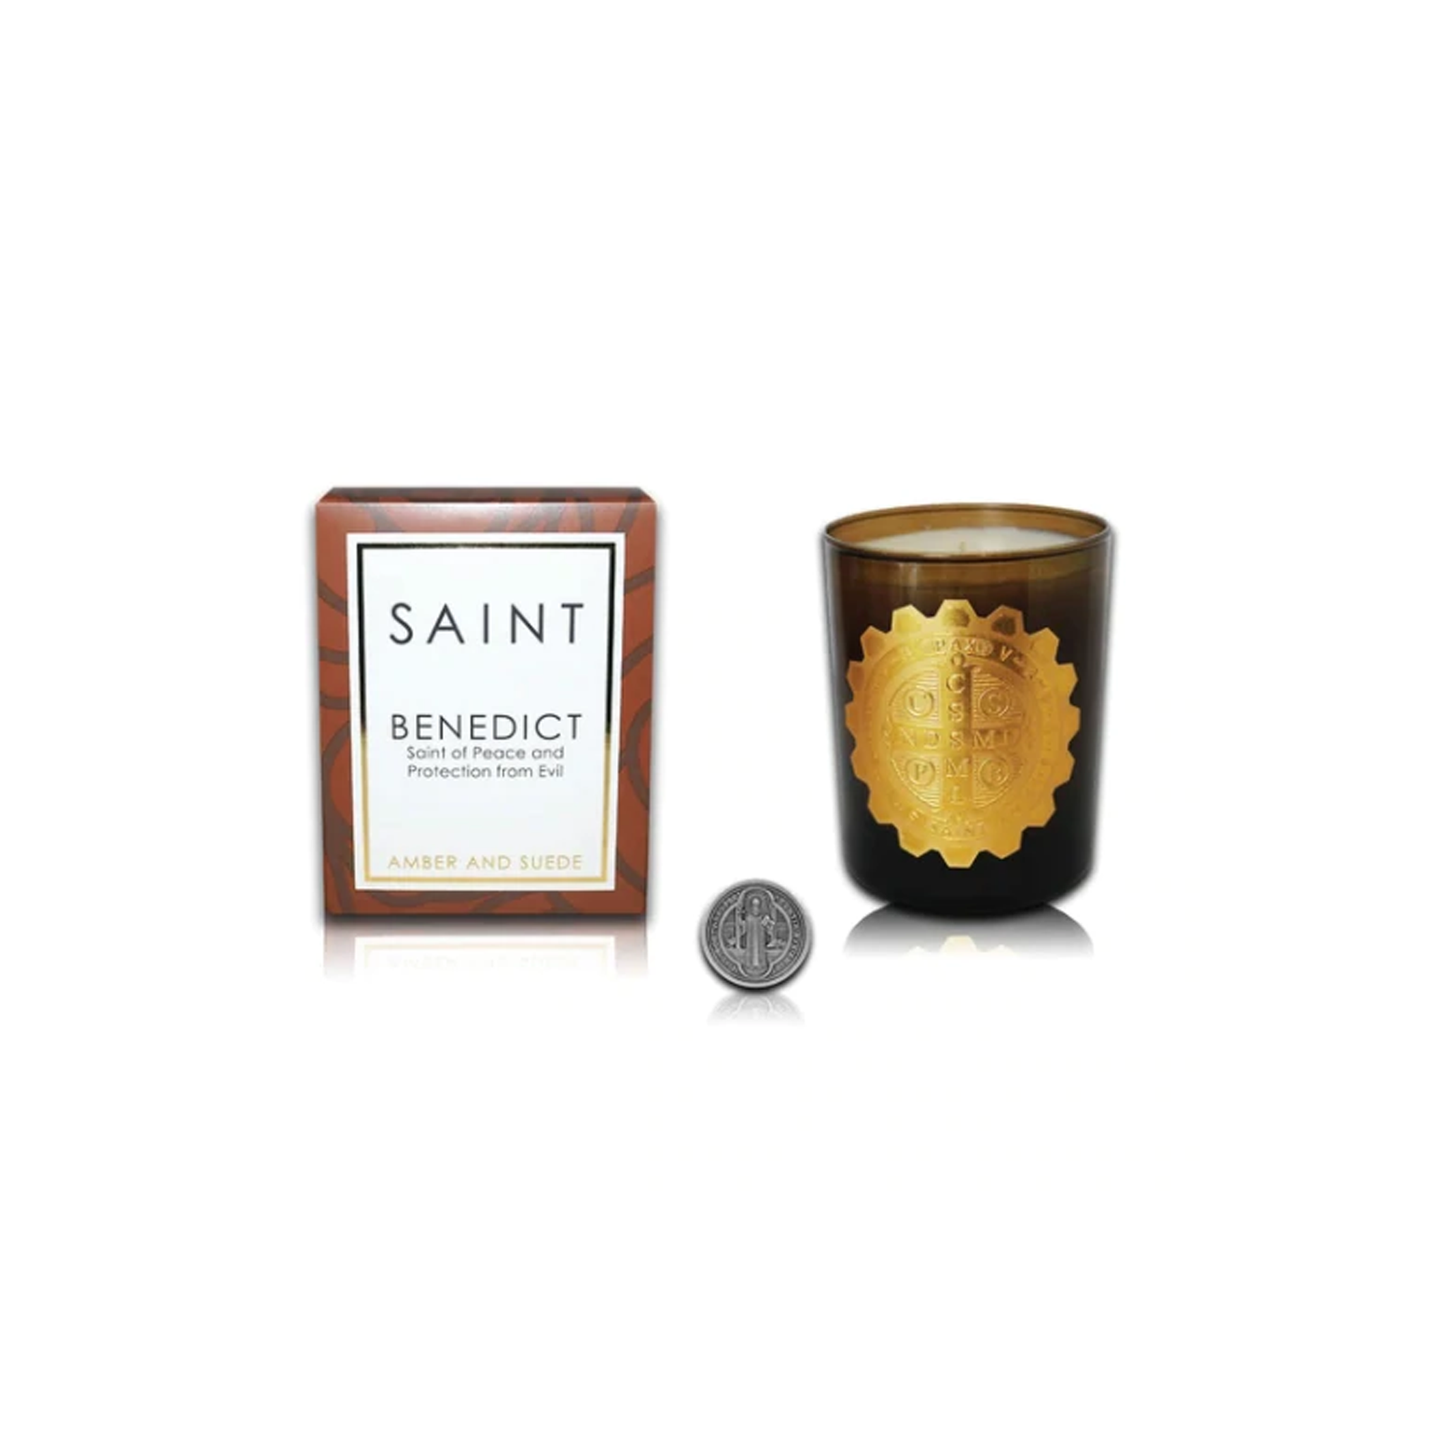 Saint Benedict, 14oz Special Edition Candle